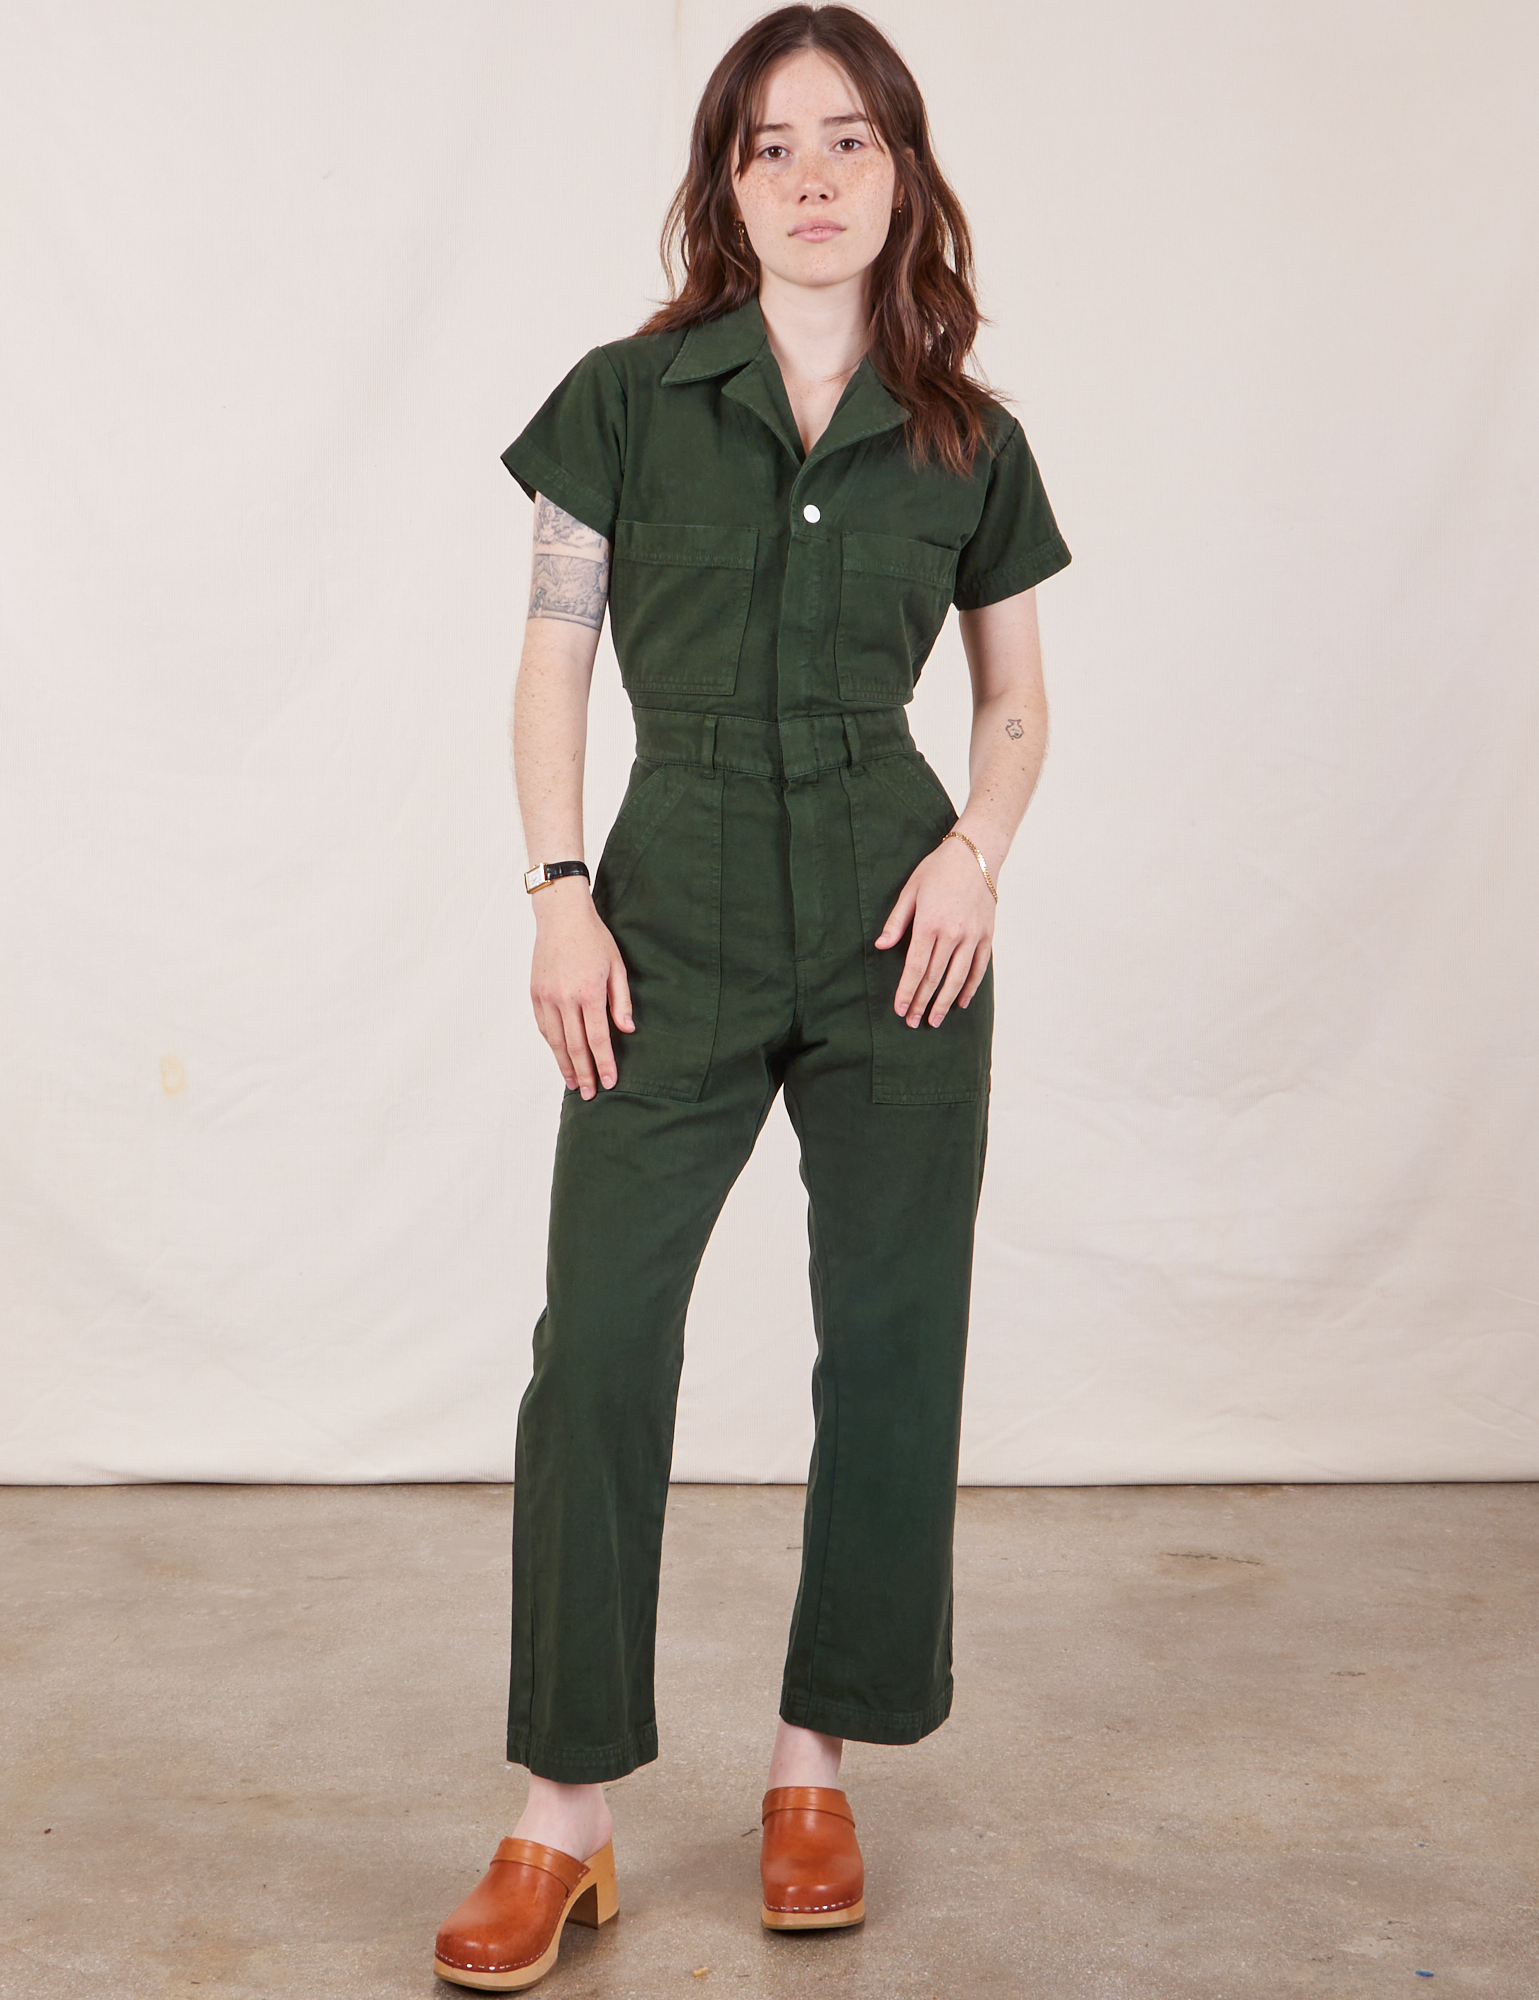 Hana is 5’3” and wearing XXS Petite Short Sleeve Jumpsuit in Swamp Green